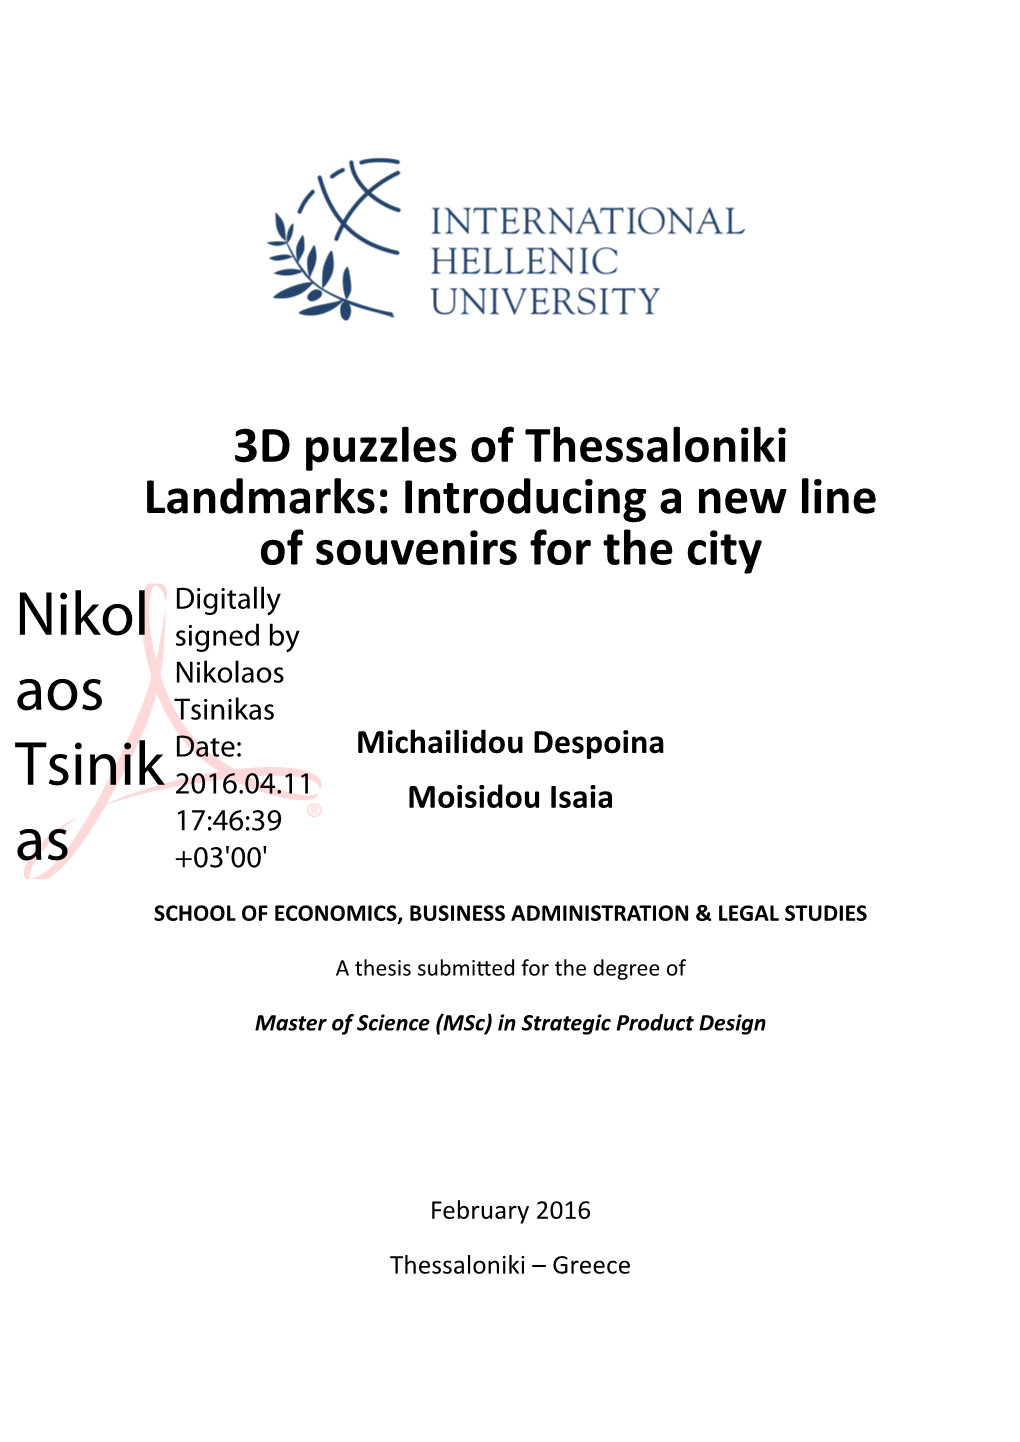 3D Puzzles of Thessaloniki Landmarks: Introducing a New Line of Souvenirs for the City